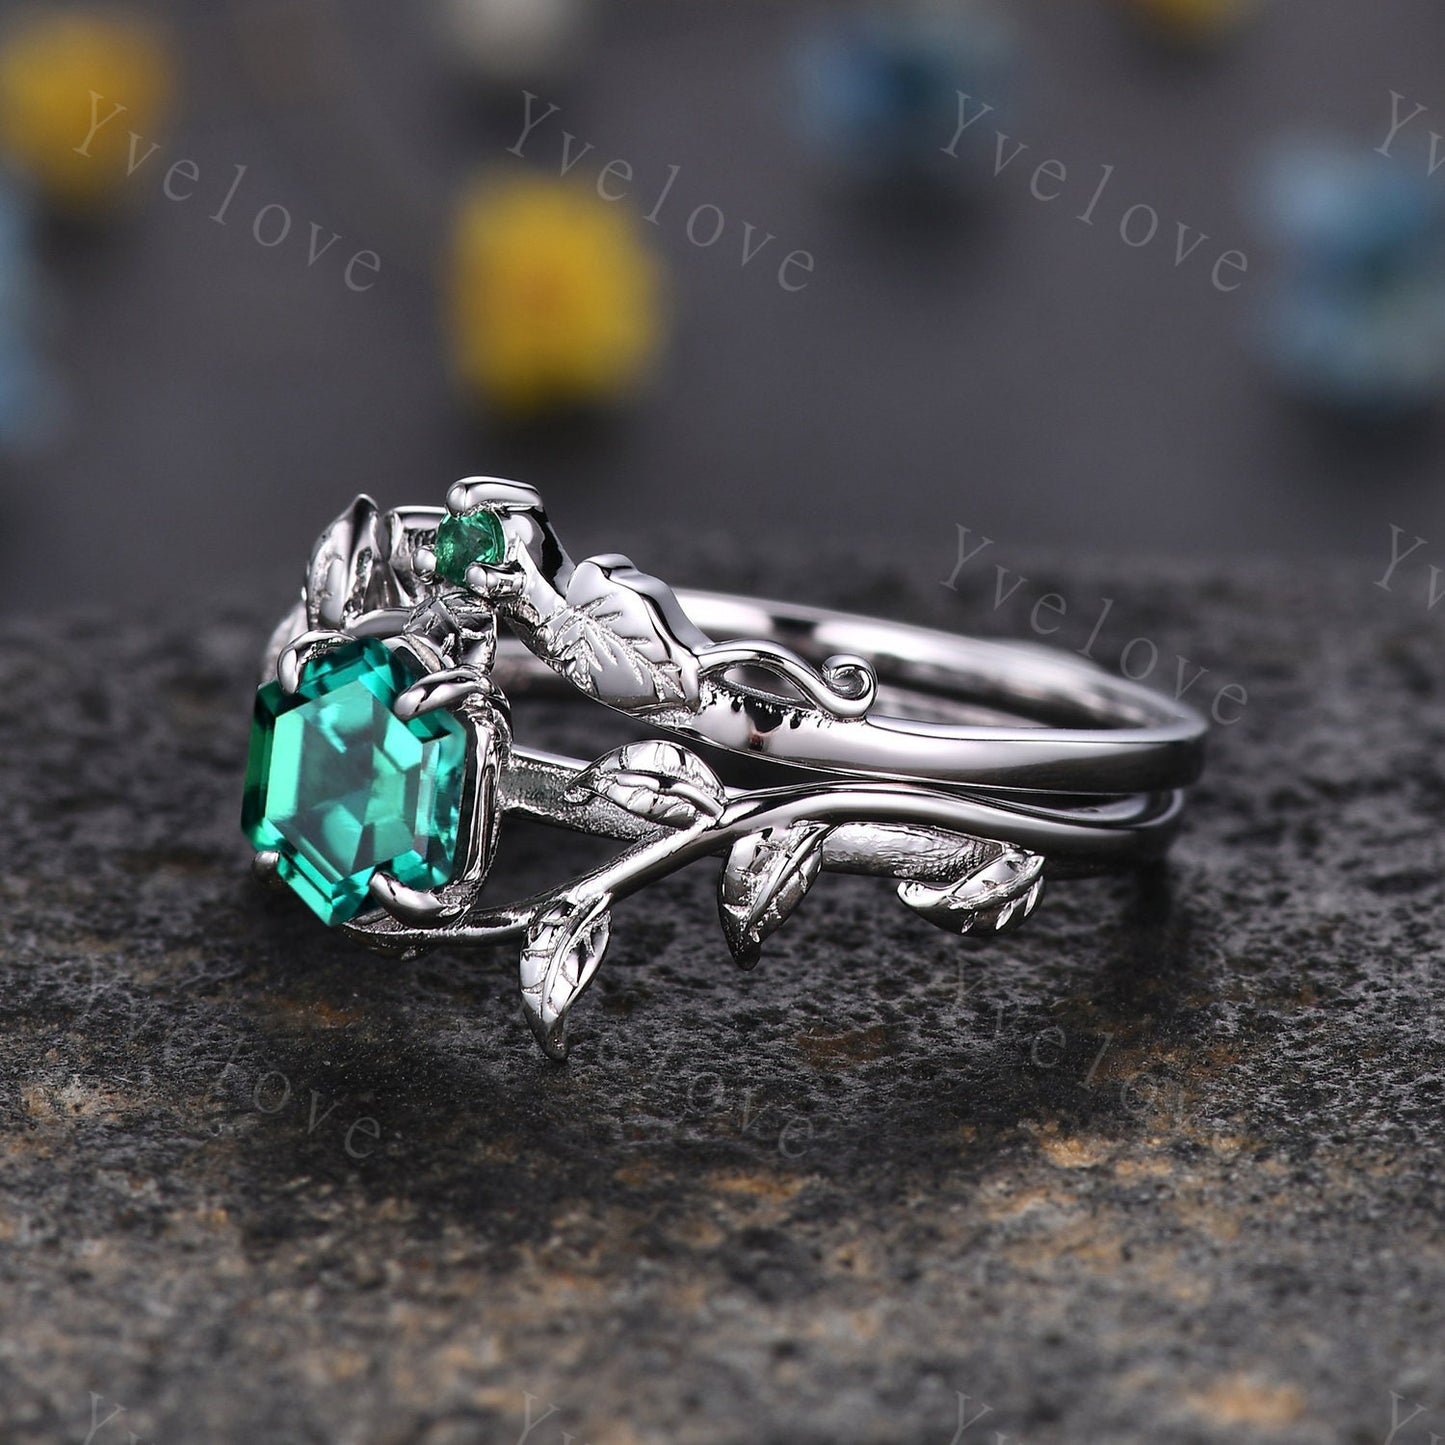 Hexagon Emerald Ring,Vintage Twig Vine Leaf Ring,Unique Emerald Engagement Ring,May birthstone Ring,Promise Anniversary Bridal Ring Gift